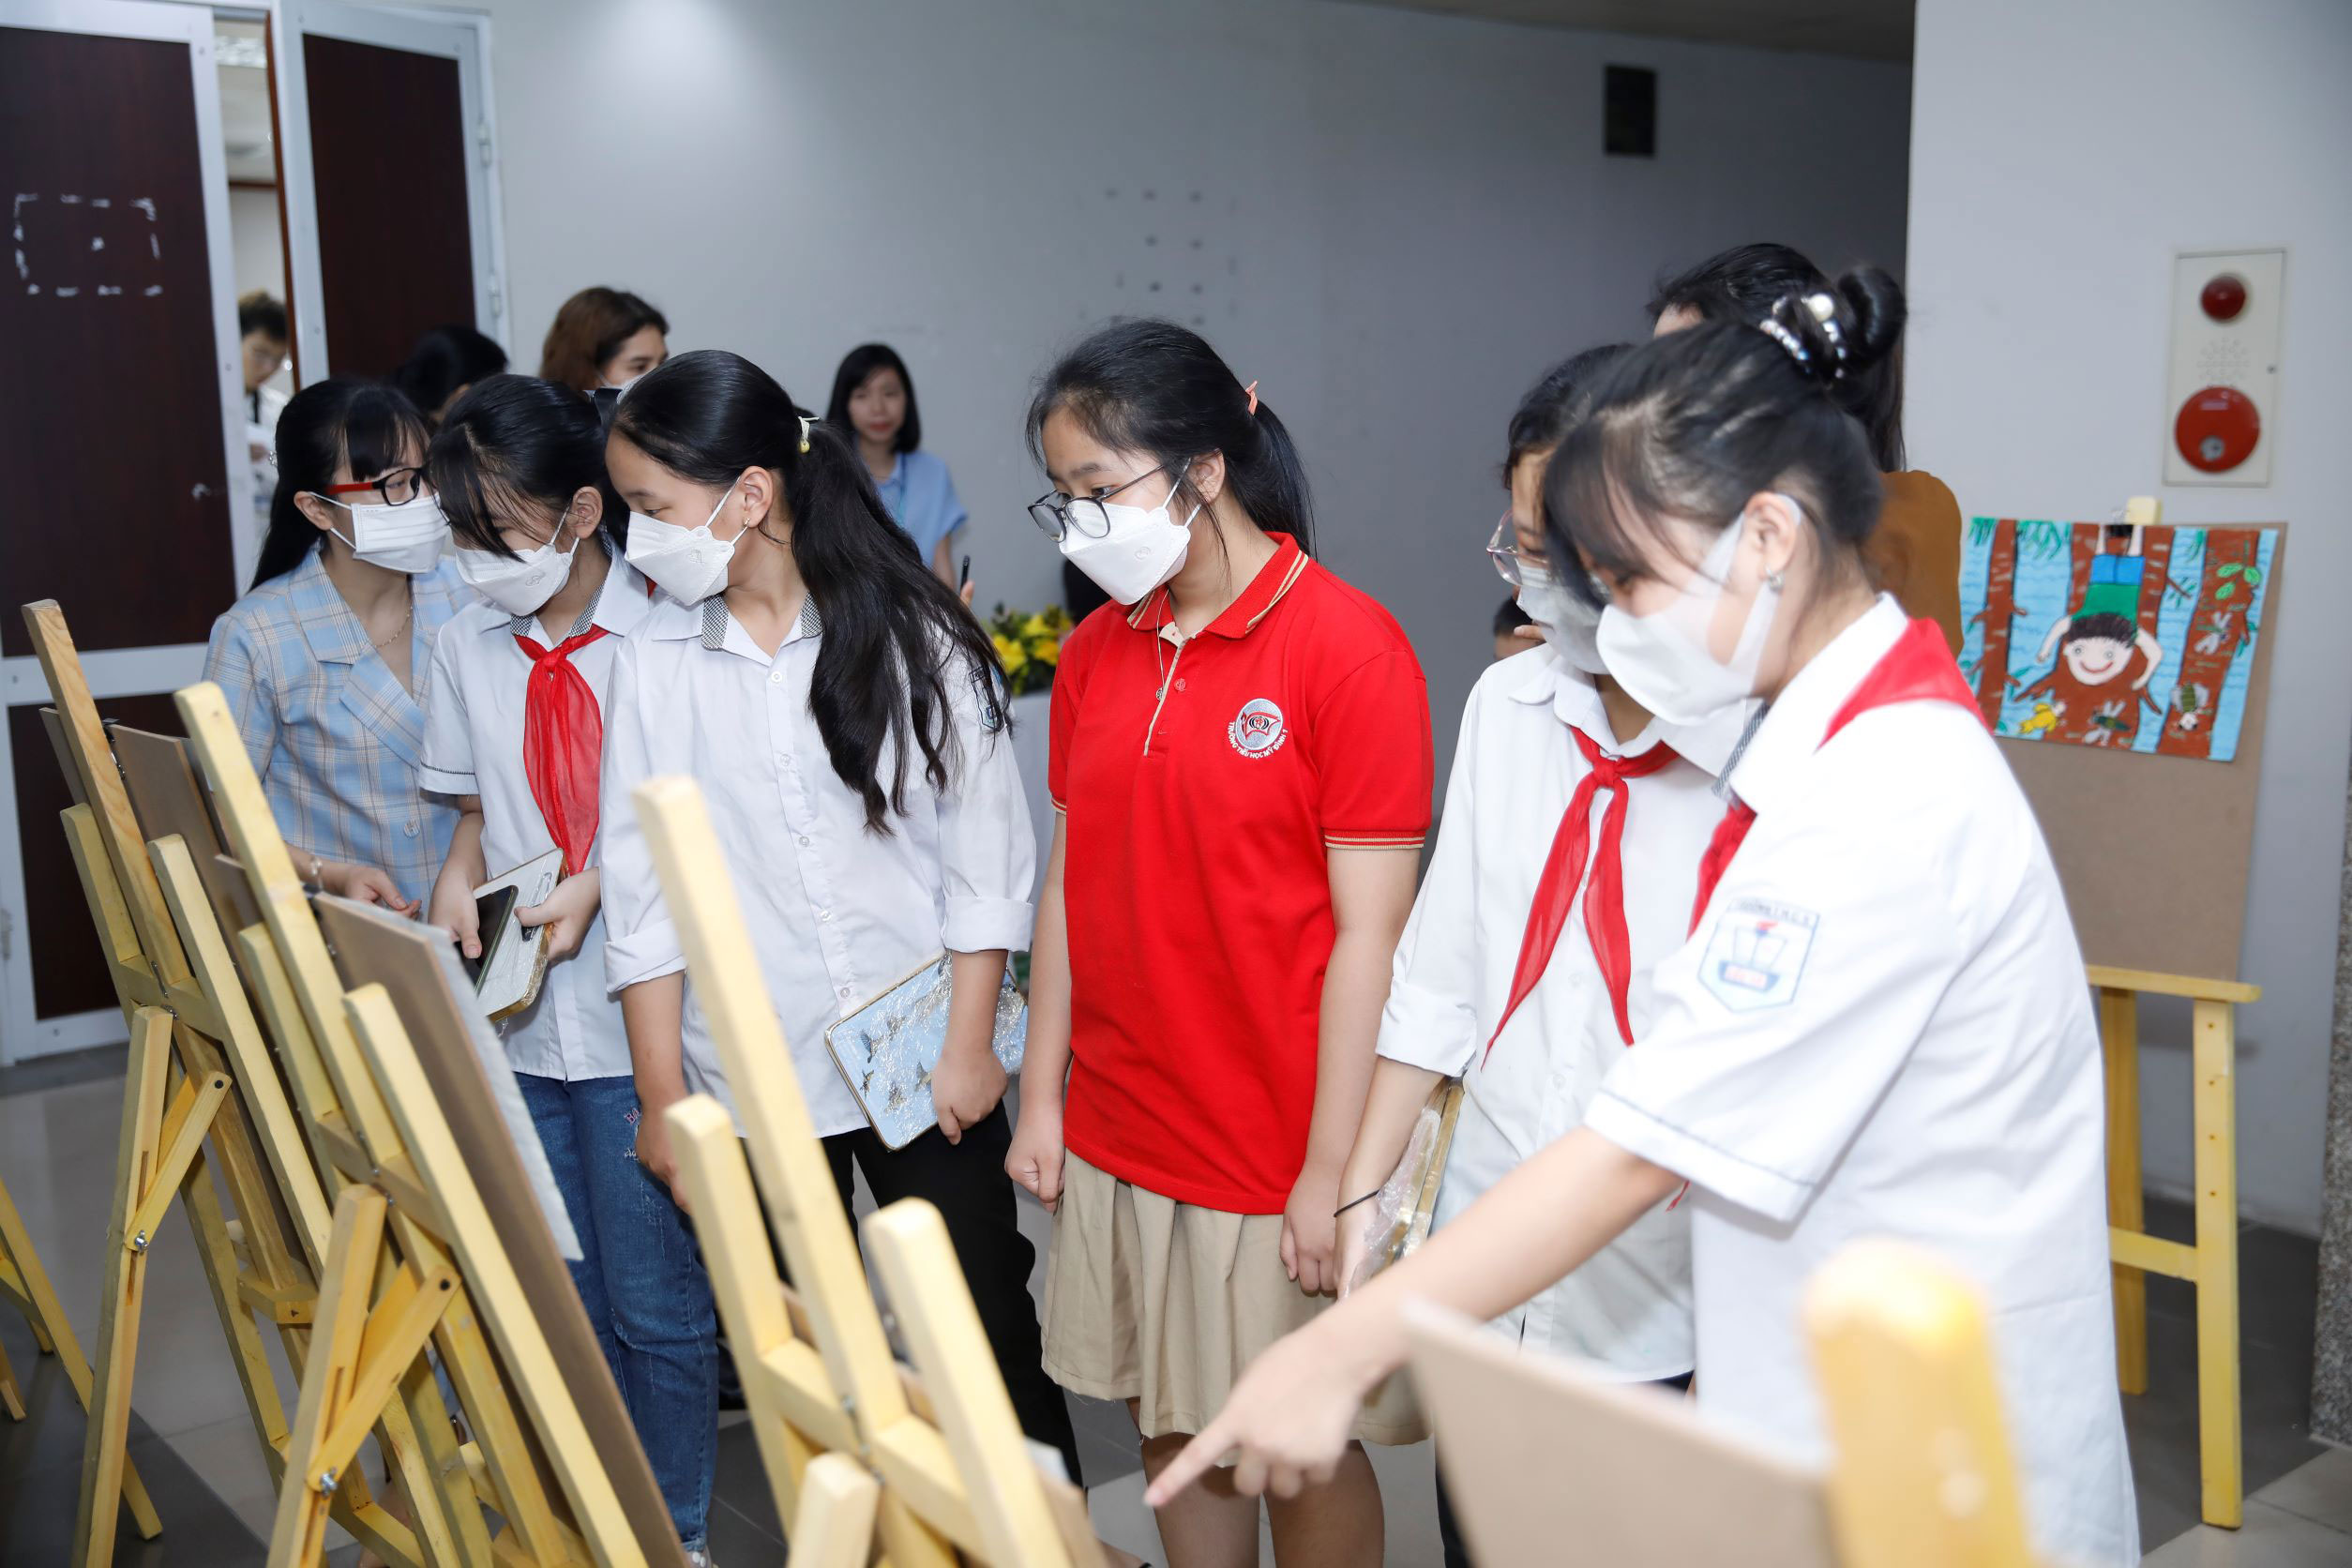 More than 3,600 students participated in “Painting for Forest planting” with Panasonic